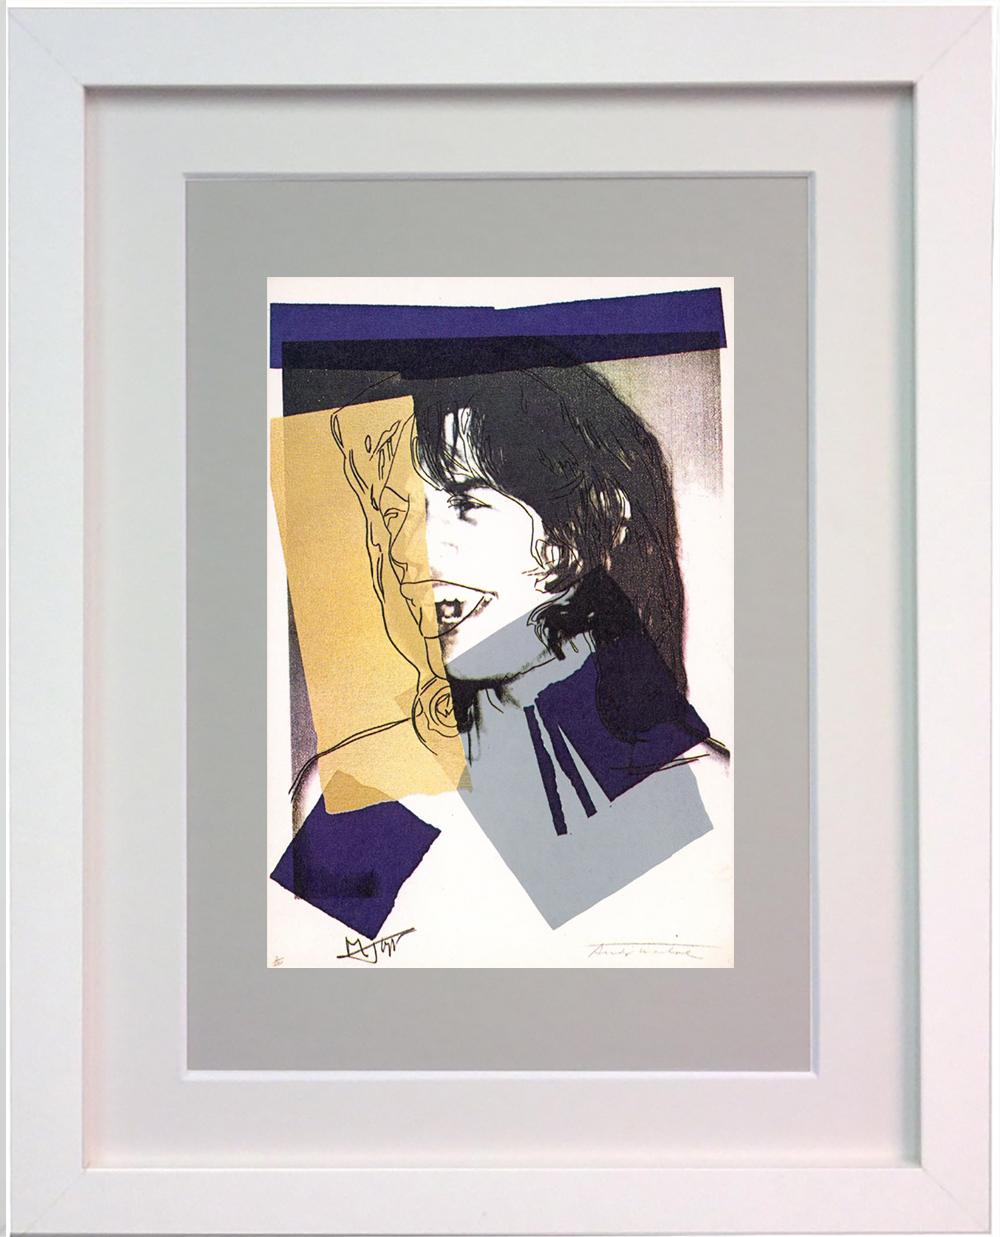 Andy Warhol, Mick Jagger, Framed Announcement-card, 1975 - Art by (after) Andy Warhol